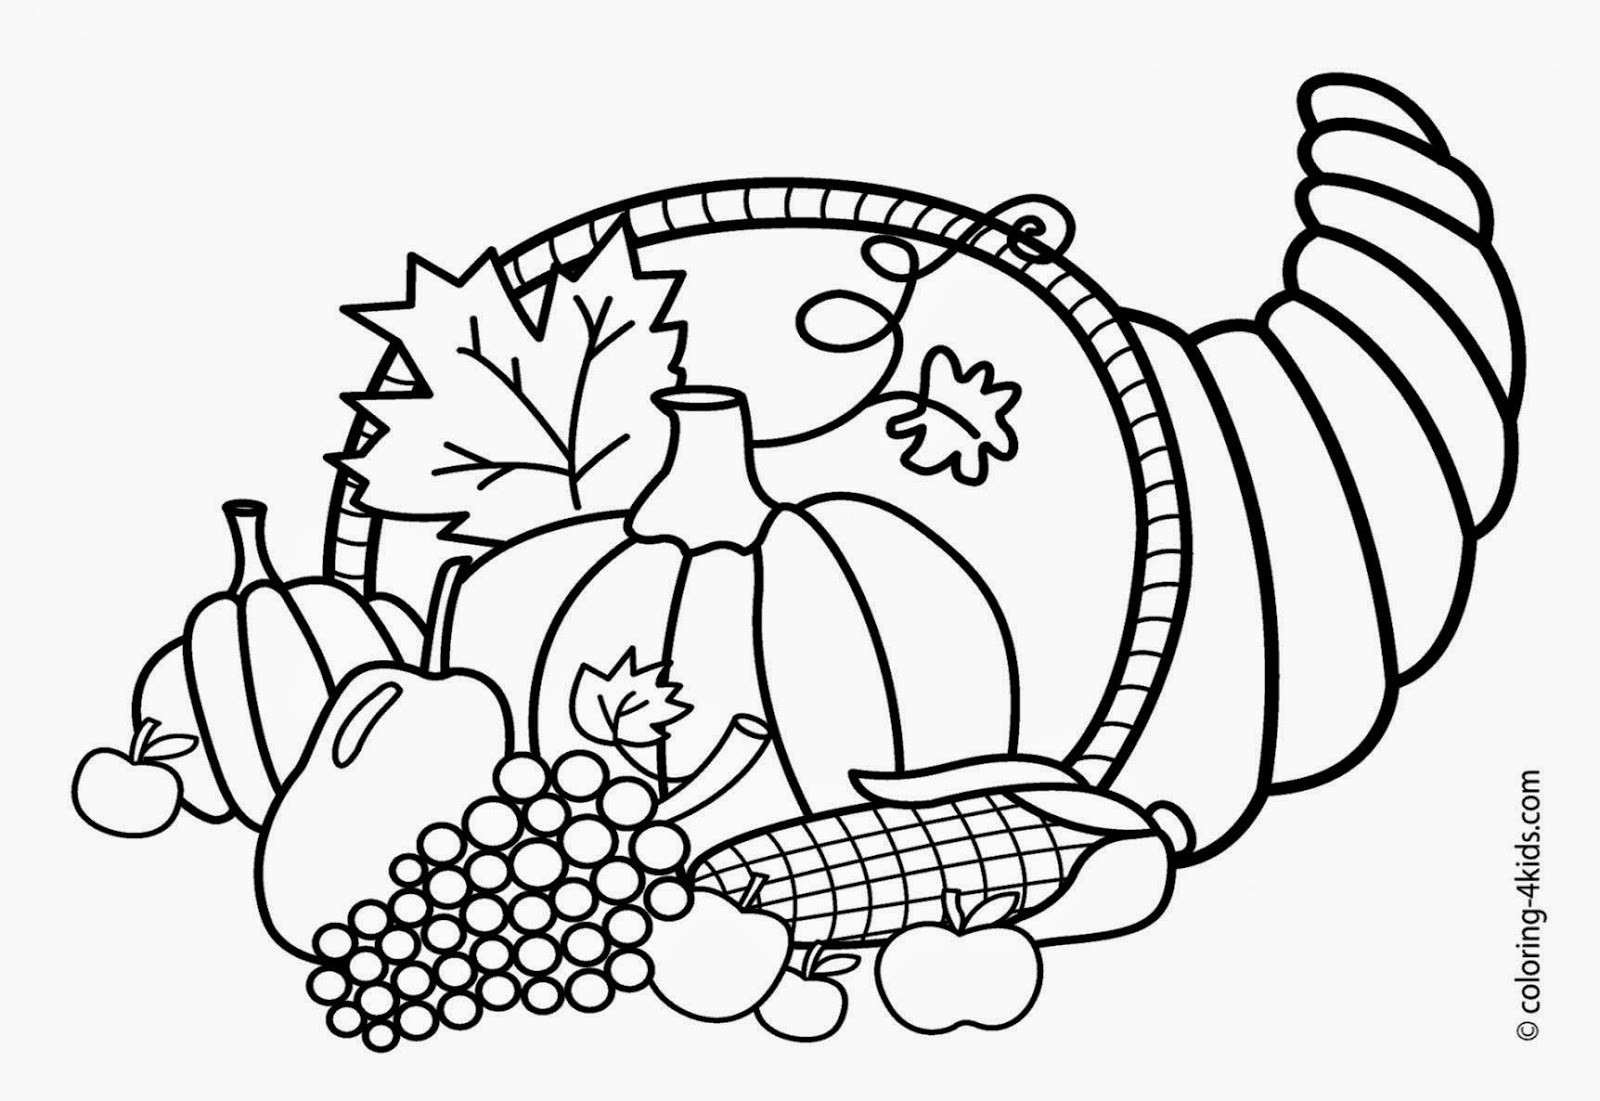 Thanksgiving Coloring Pages For Kids
 Free Coloring Sheet